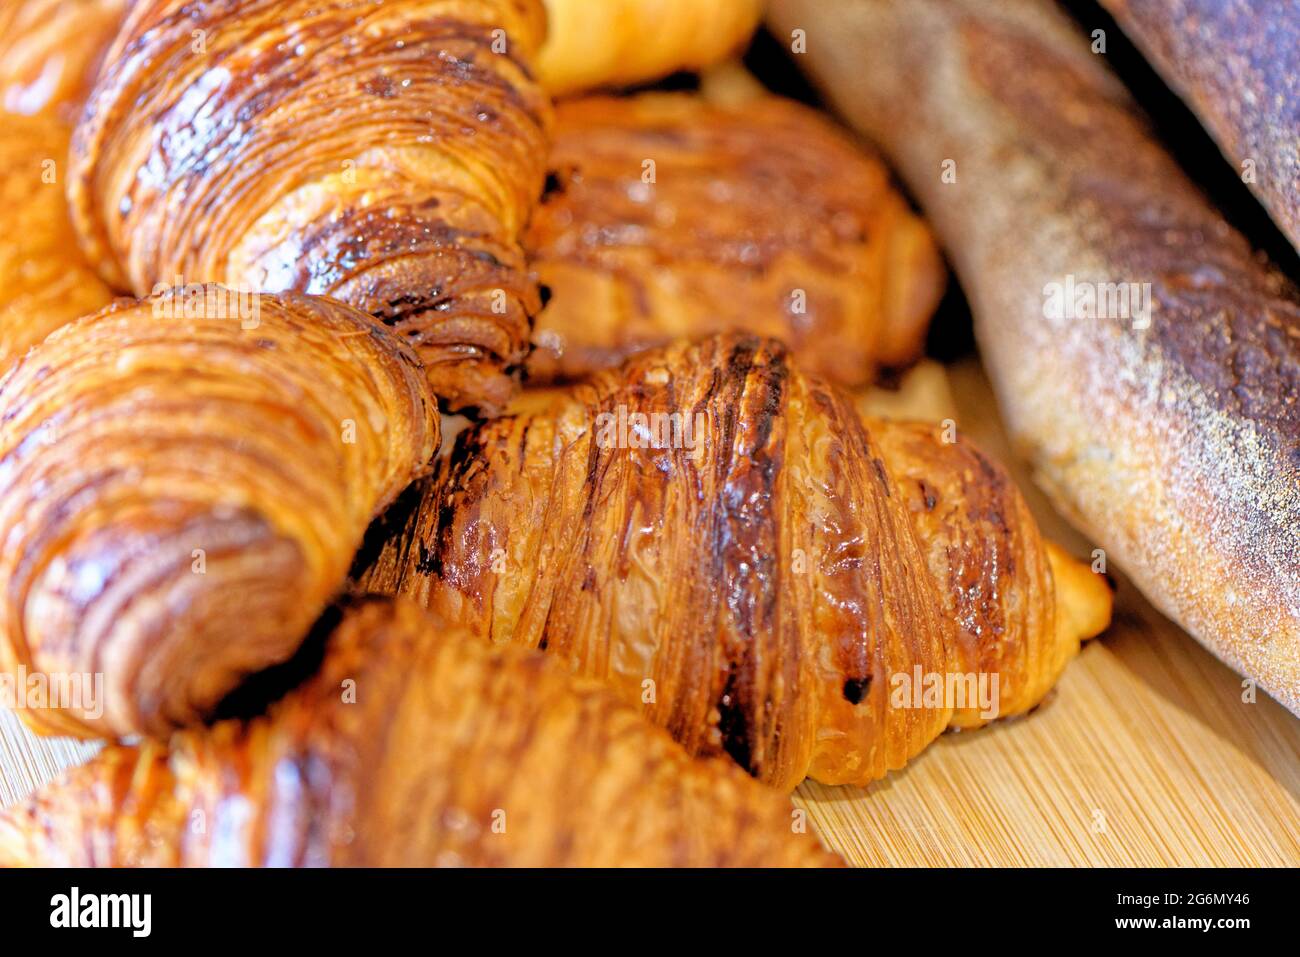 Assortment of Pastries Croissants, Pains au Chocolat and French baguettes -  French bakery Stock Photo - Alamy